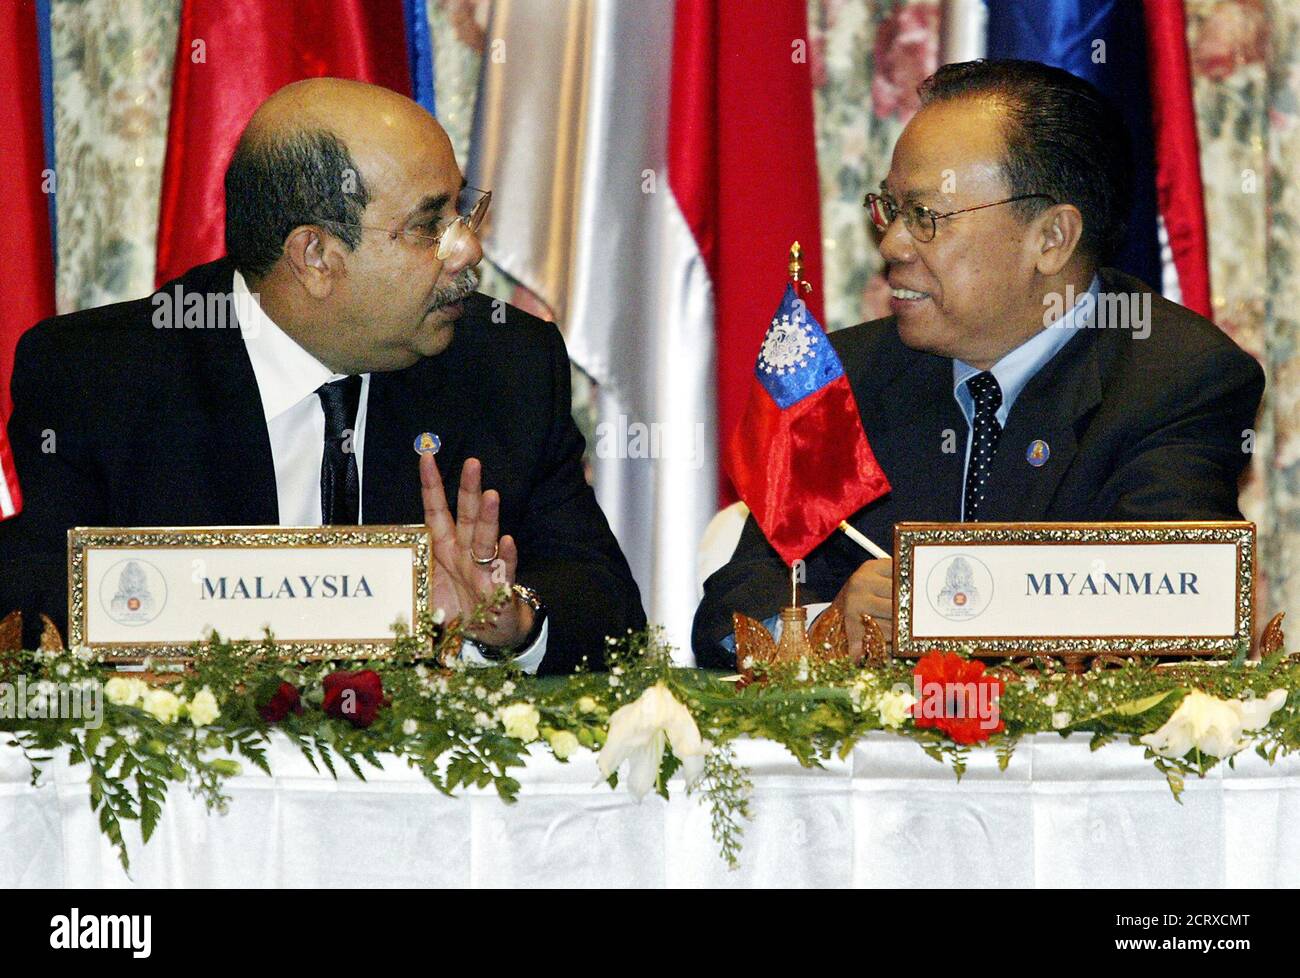 Malaysian Foreign Minister Syed Hamid Albar (L) and his Myanmar counterpart Win Aung speak during the closing ceremony of the 36th ASEAN Ministerial Meeting in Phnom Penh, Cambodia on June 17, 2003. Southeast Asia's main political group piled more pressure on member Myanmar on Tuesday to release Aung San Suu Kyi, as the issue has for the first time eroded the Association of South East Asian Nations principle of non-interference and diverted attention from the war on terror and regional fears that North Korea is on the way to a nuclear capability. REUTERS/Adrees Latif  AL/TW Stock Photo